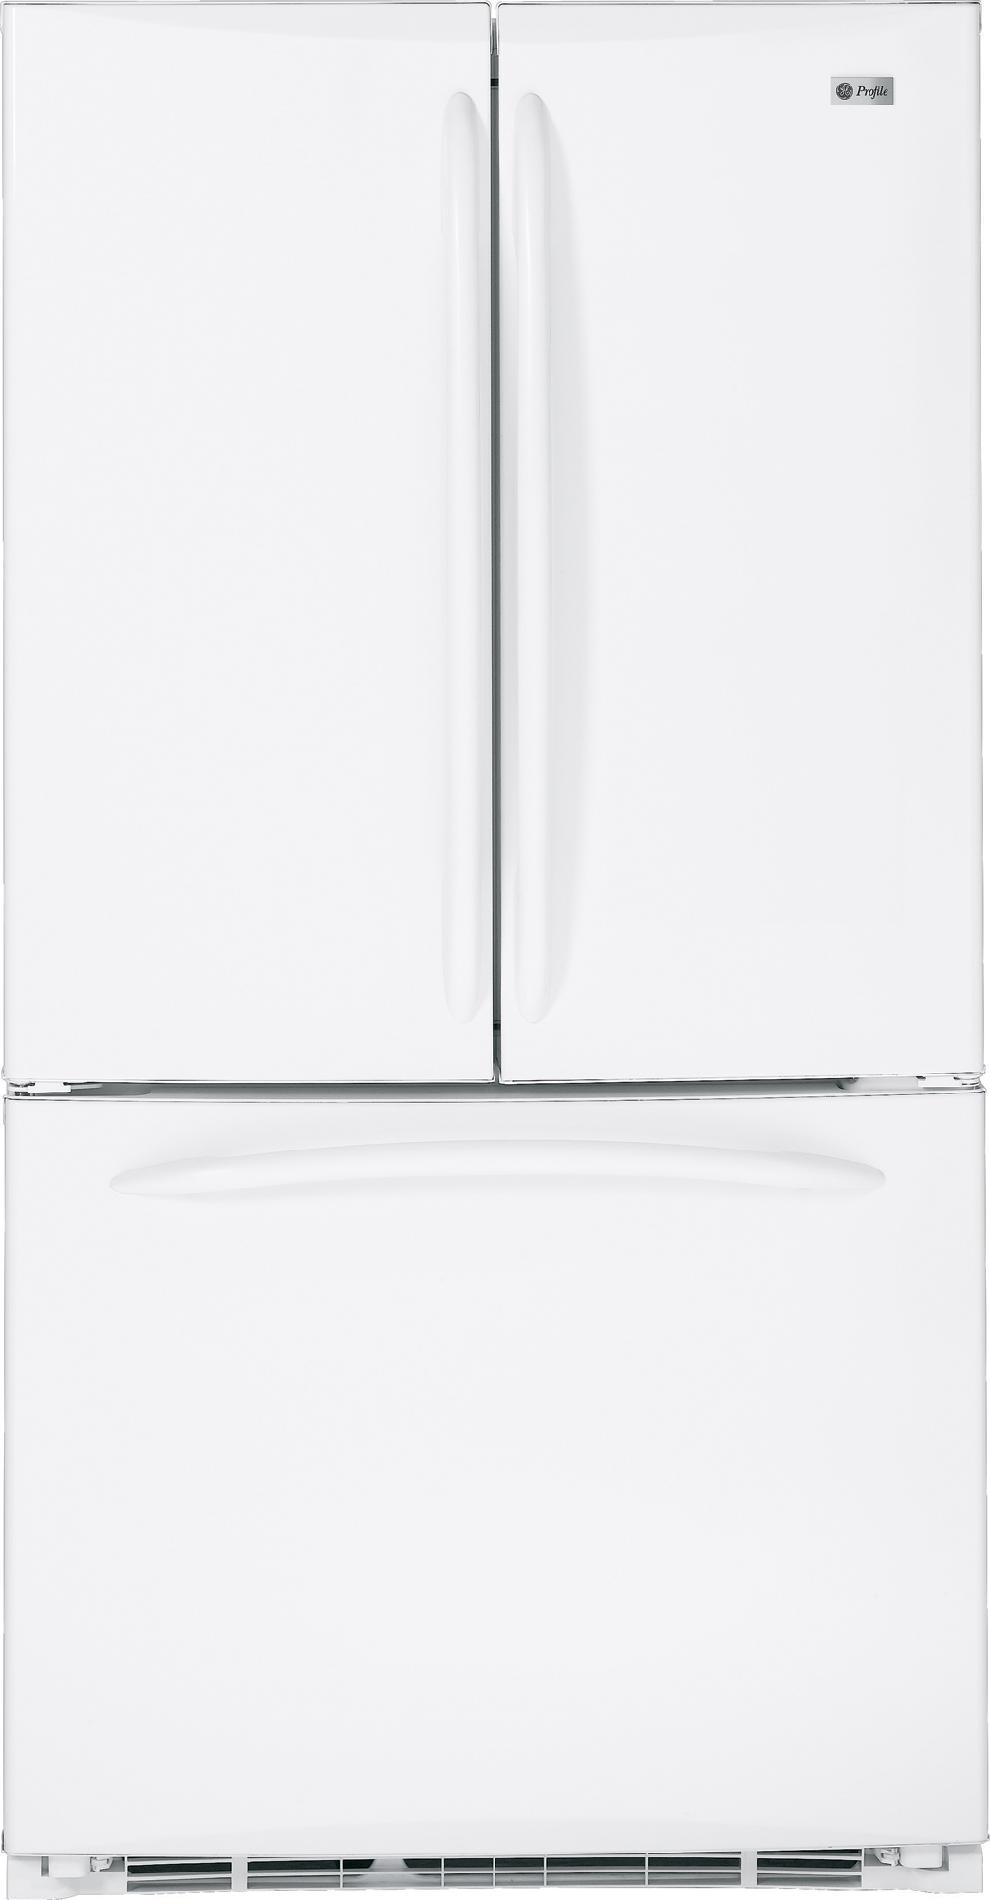 GENERAL ELECTRIC GE Profile Counter-Depth 20.7 Cu. Ft. French-Door Refrigerator with Icemaker